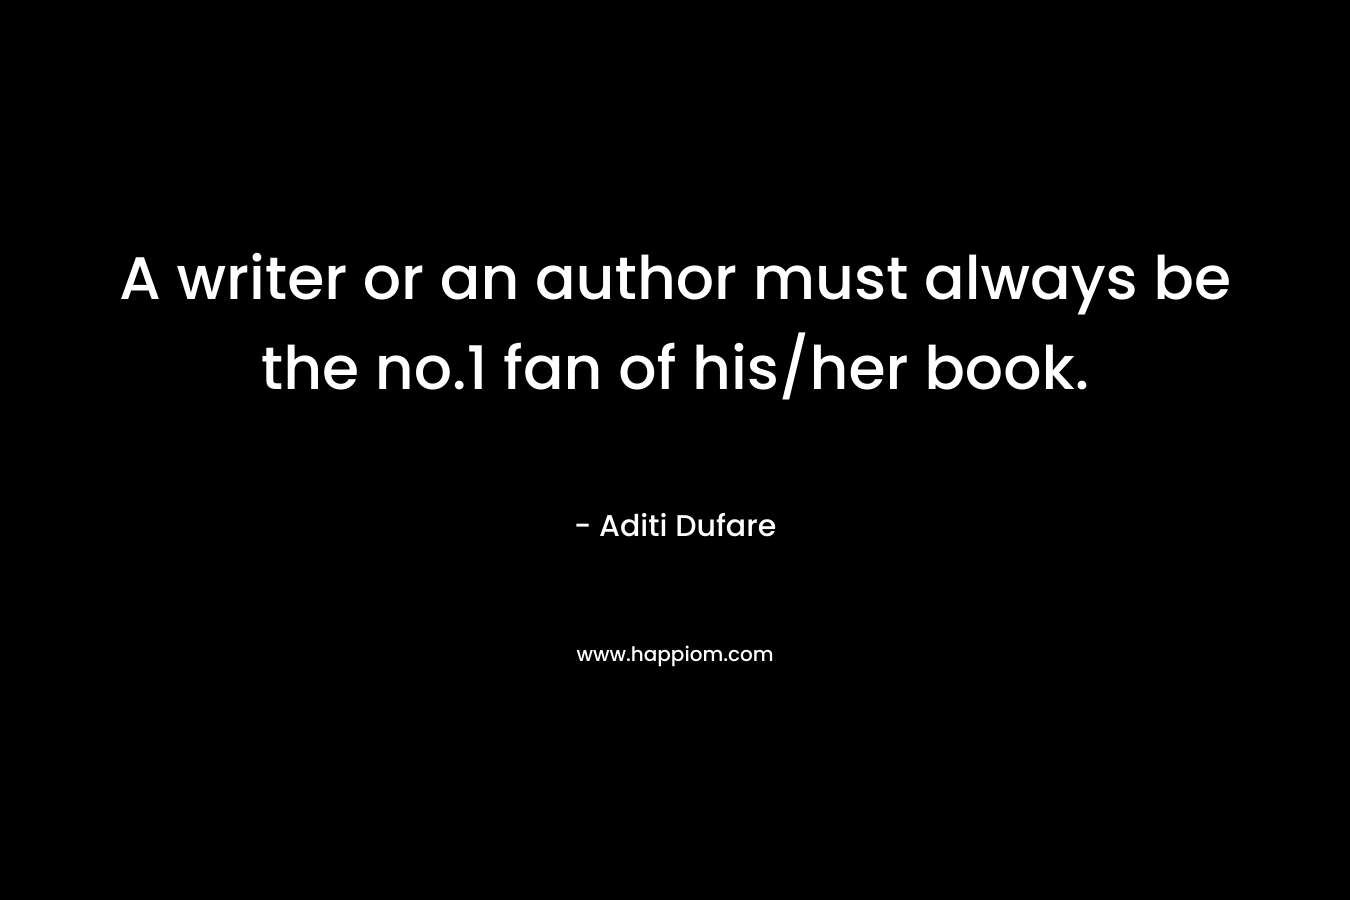 A writer or an author must always be the no.1 fan of his/her book. – Aditi Dufare